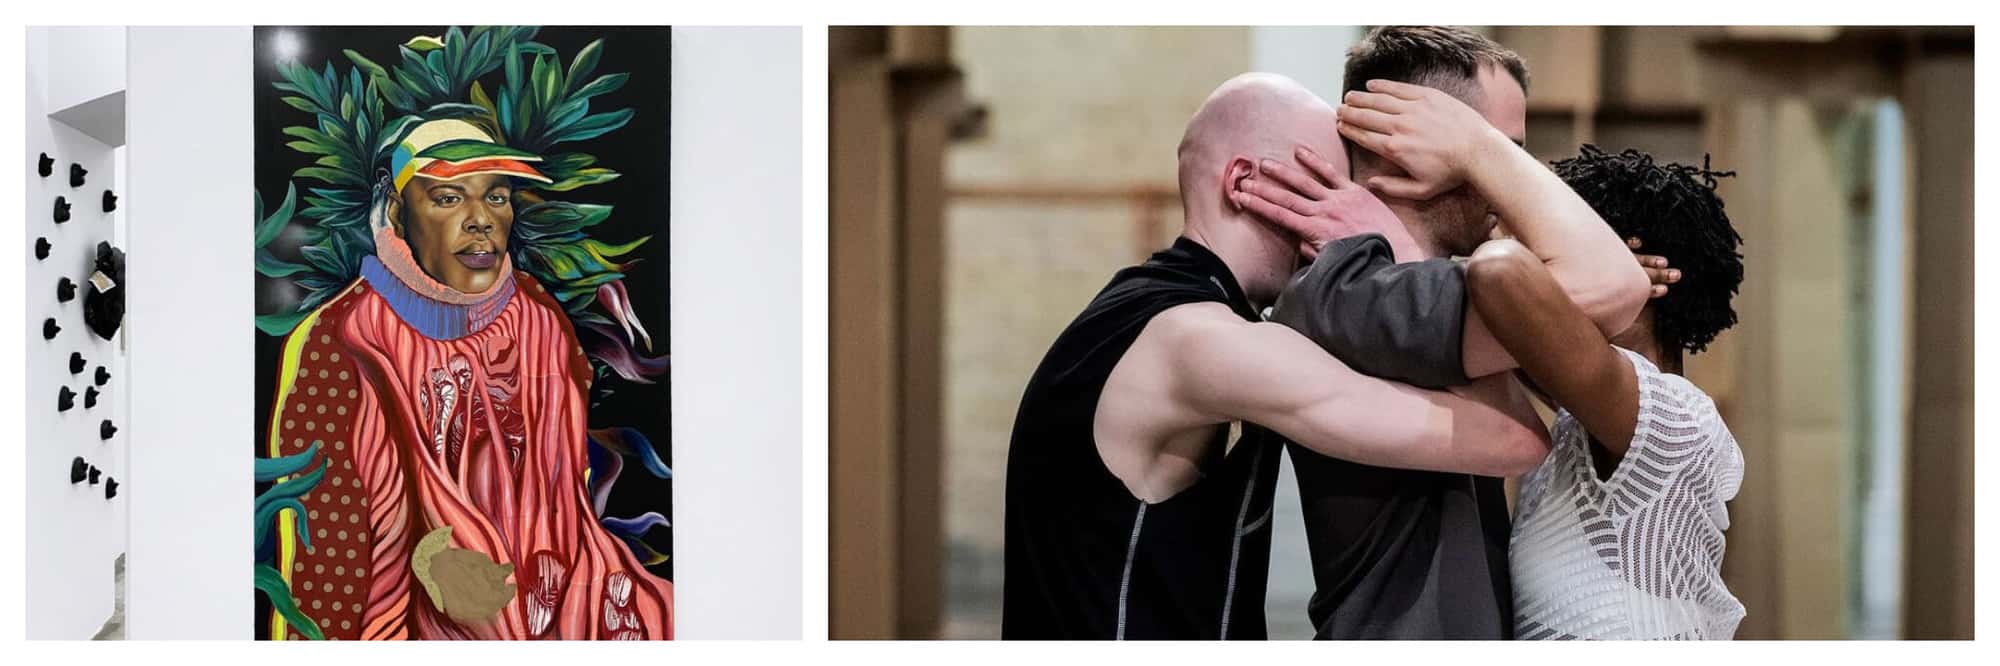 Left: A picture of a gallery with a painting of an African man in his tribal costume. Right: A photo of 2 men and a woman in what appears as a contemporary dance performance.